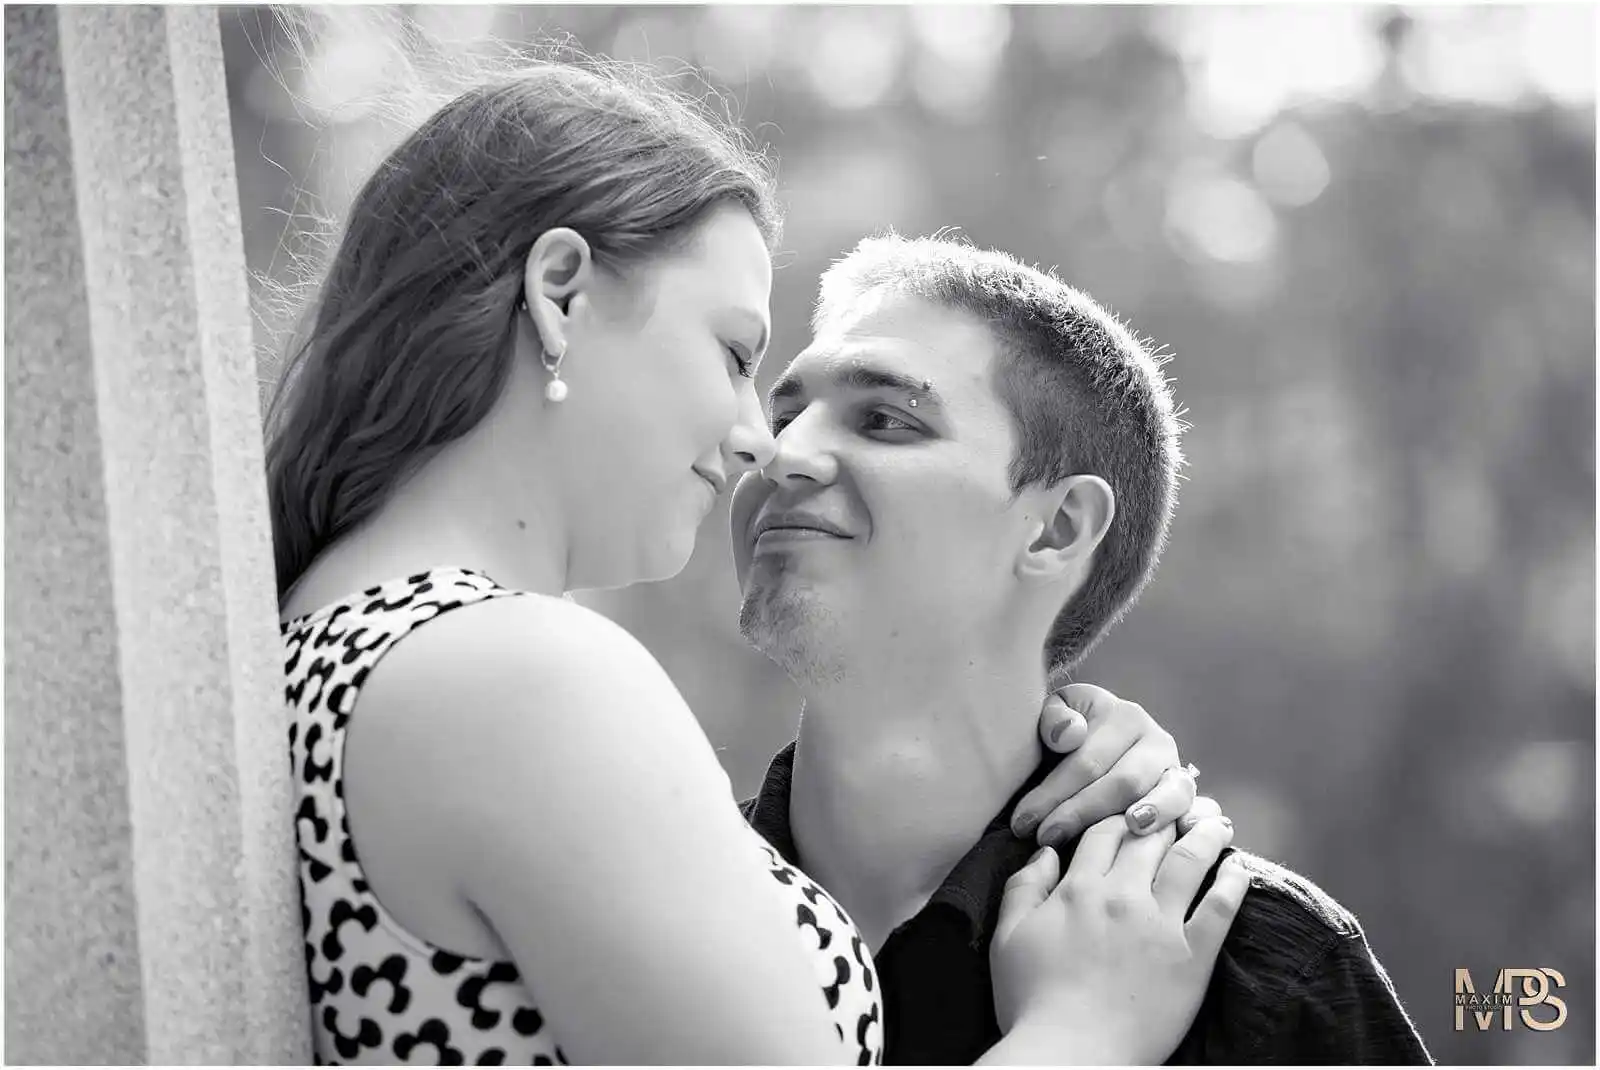 Romantic couple embracing in black and white portrait.